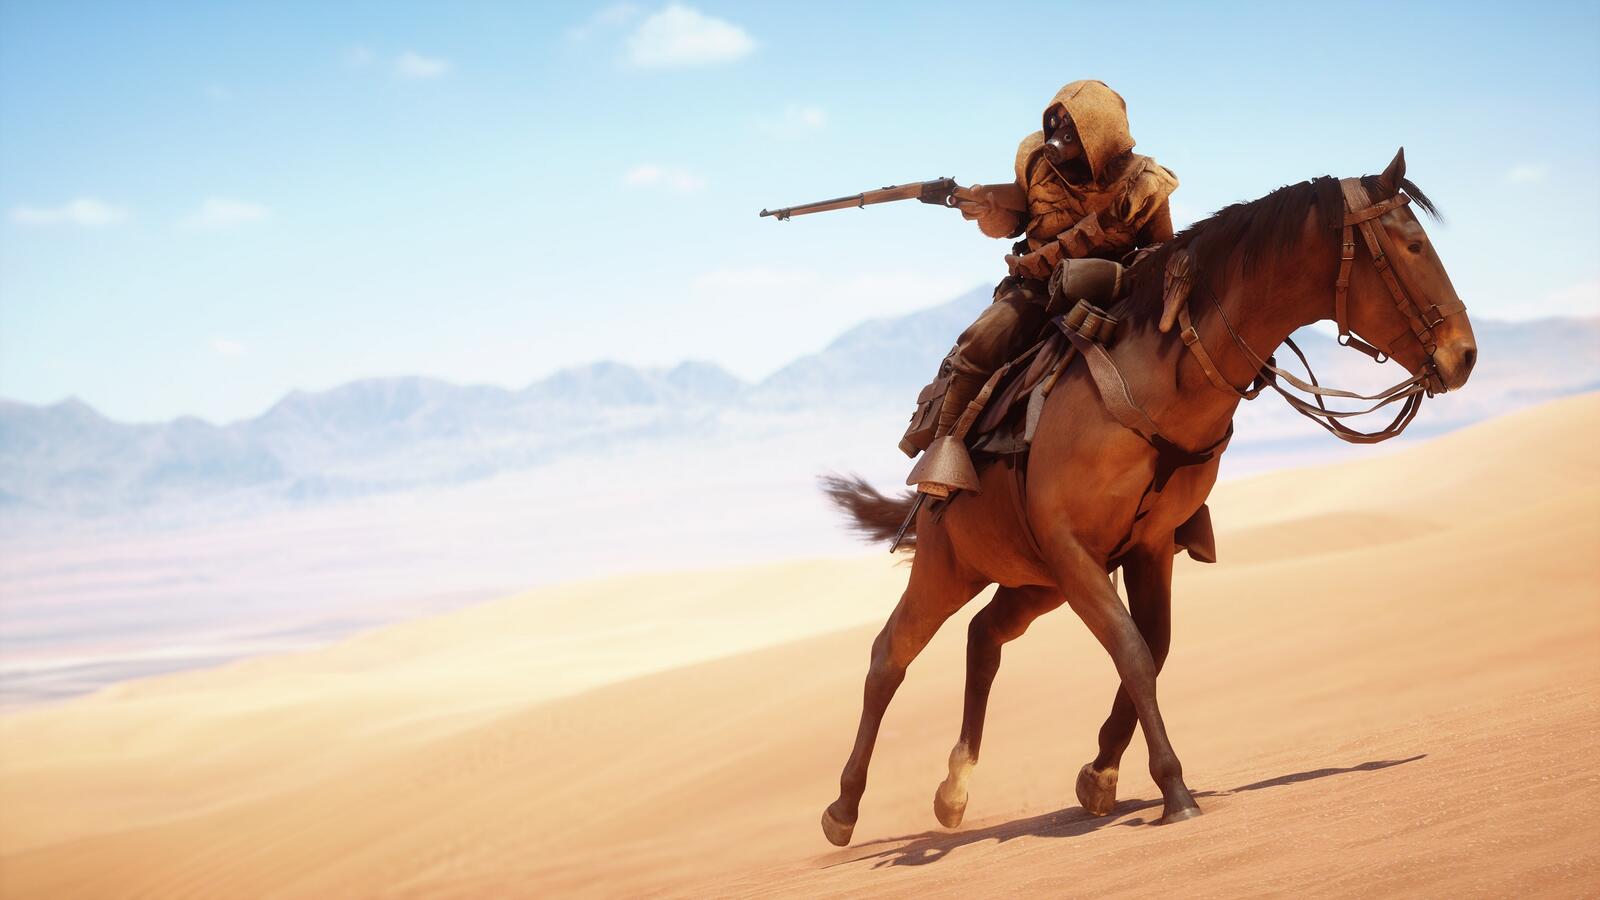 Free photo Rider with a gun on a horse from the game battlefield 1